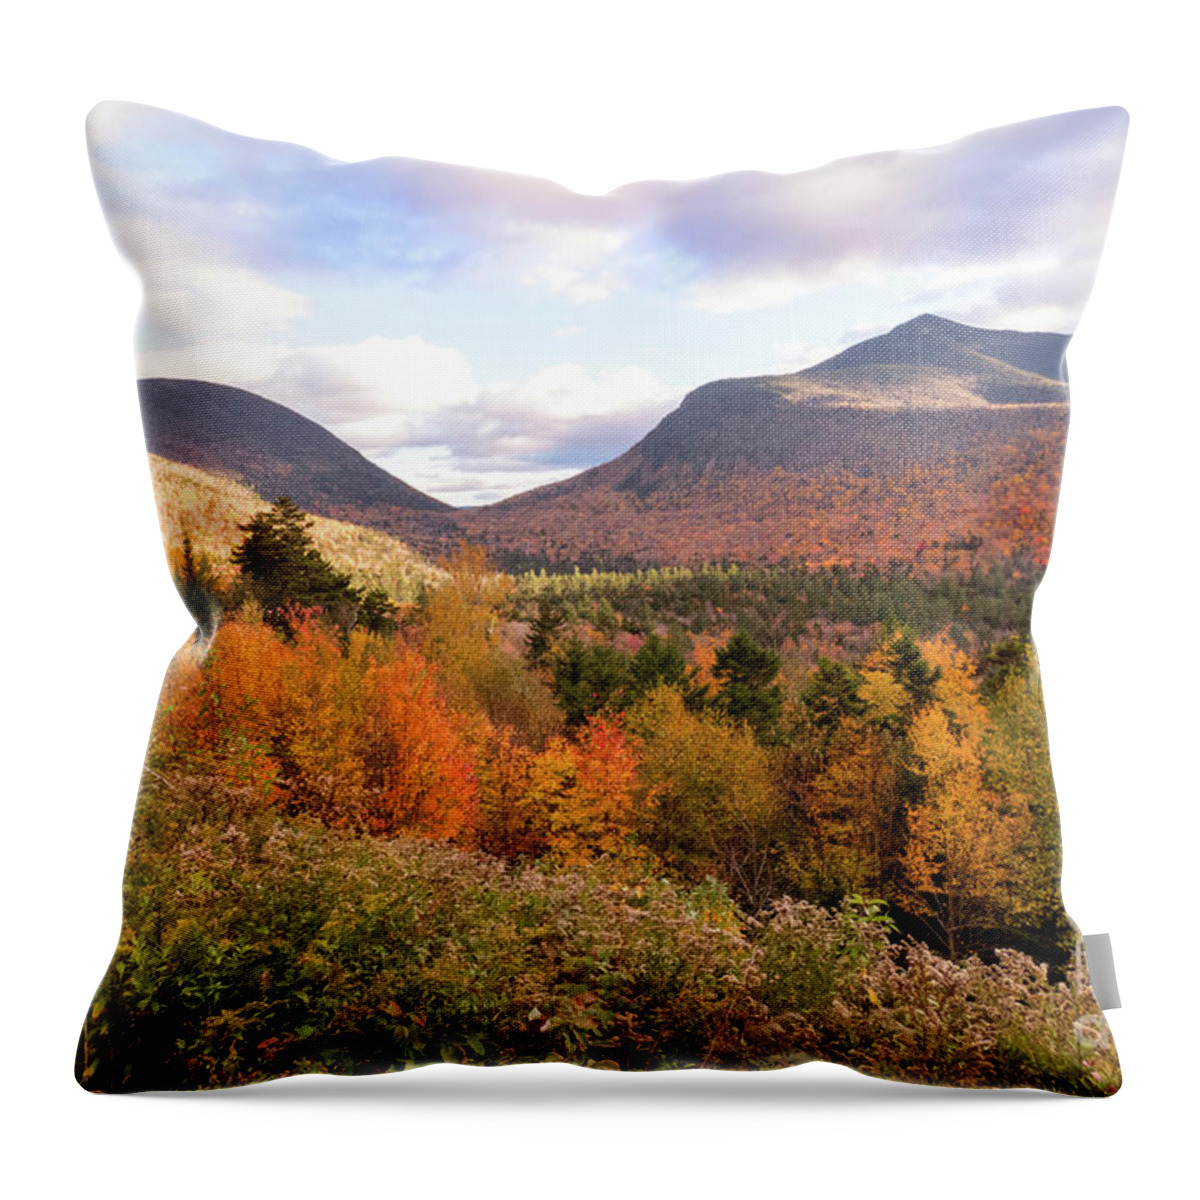 New Hampshire Throw Pillow featuring the photograph White Mtns Waterville Valley 2 by Cheryl Del Toro